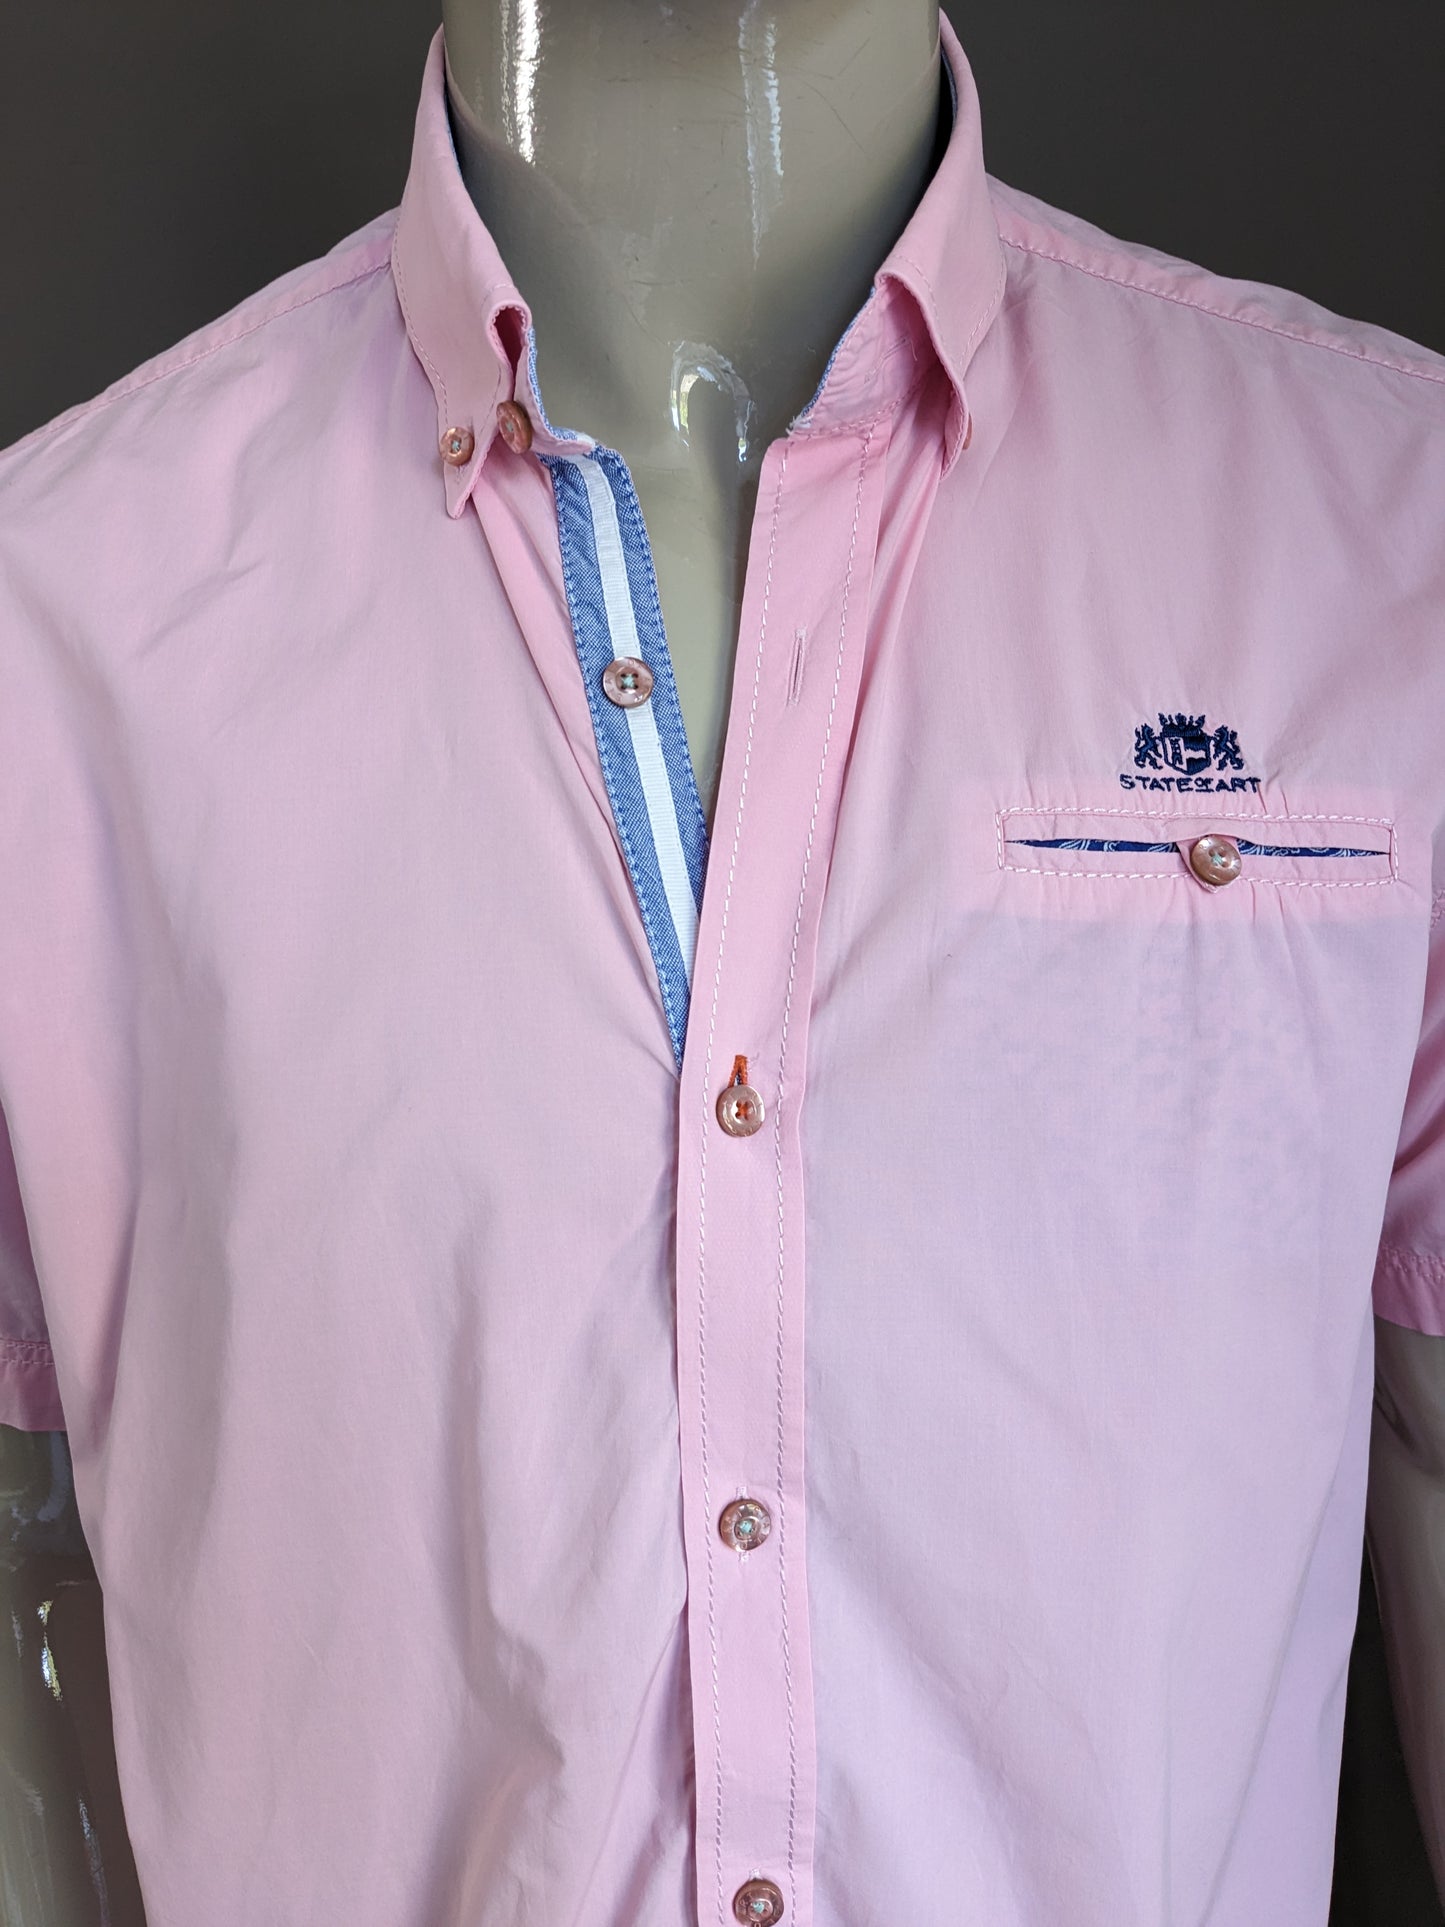 State of art shirt short sleeve. Pink colored. Size XL. Regular fit.